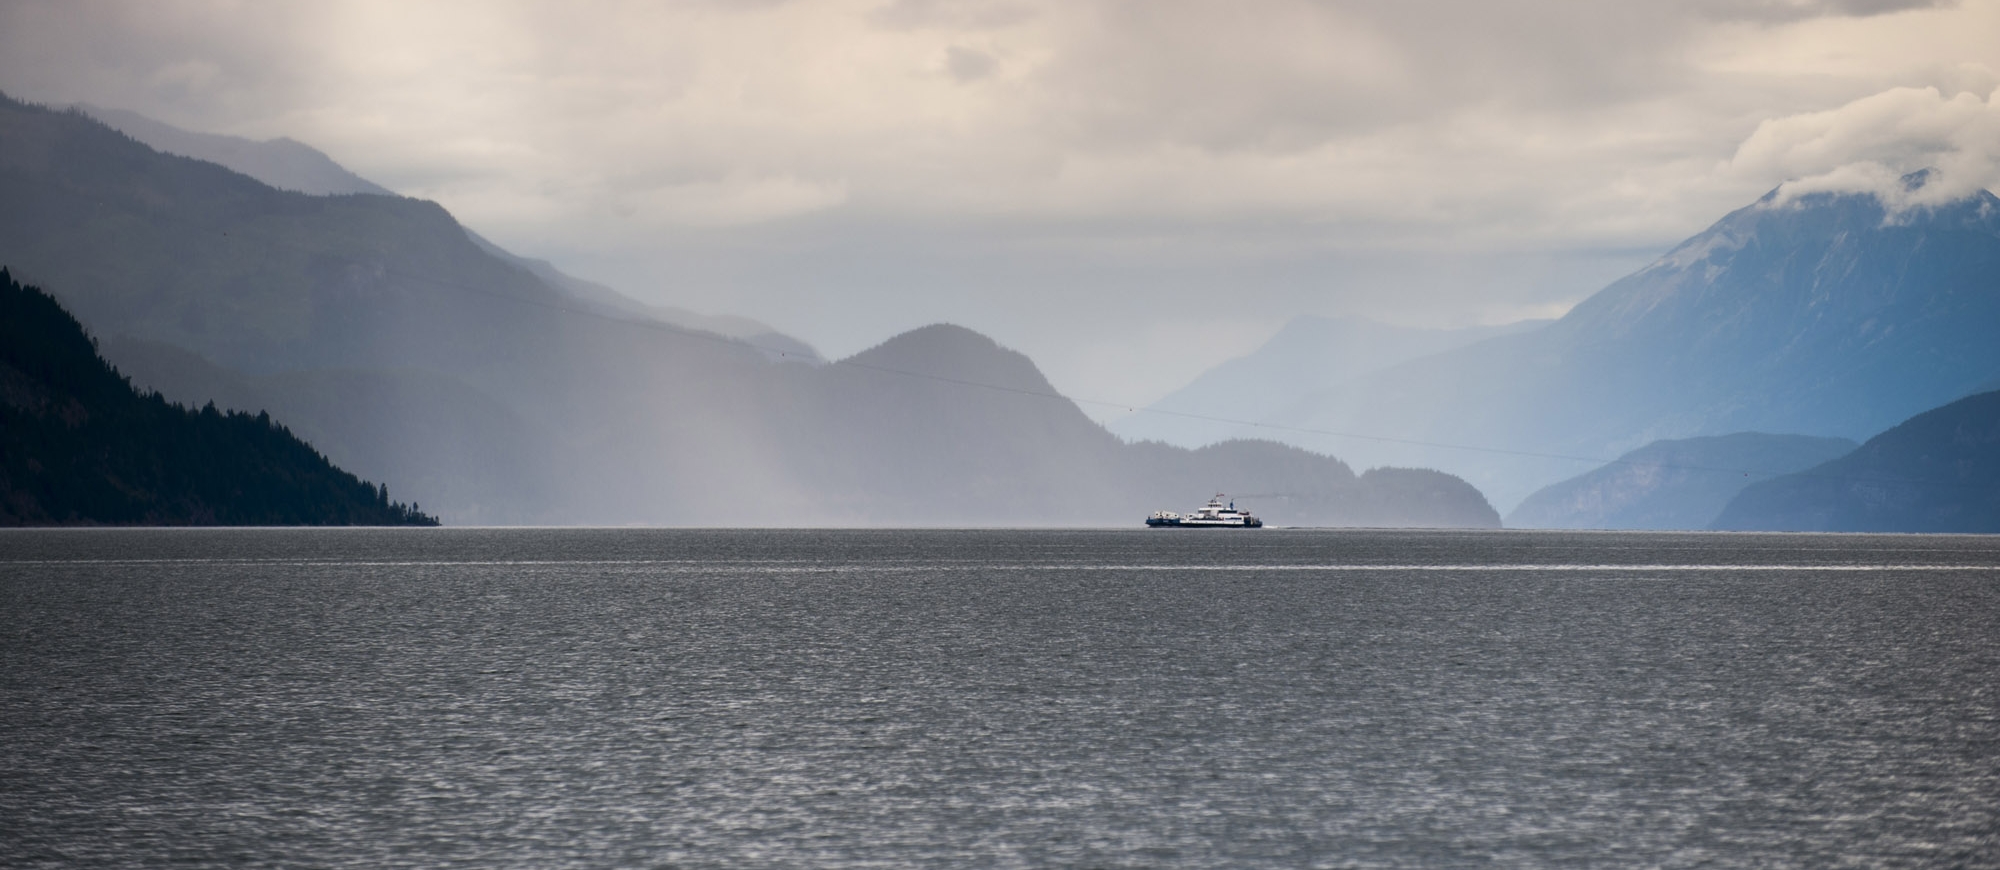 The Kootenay Lake Ferry in the distance.